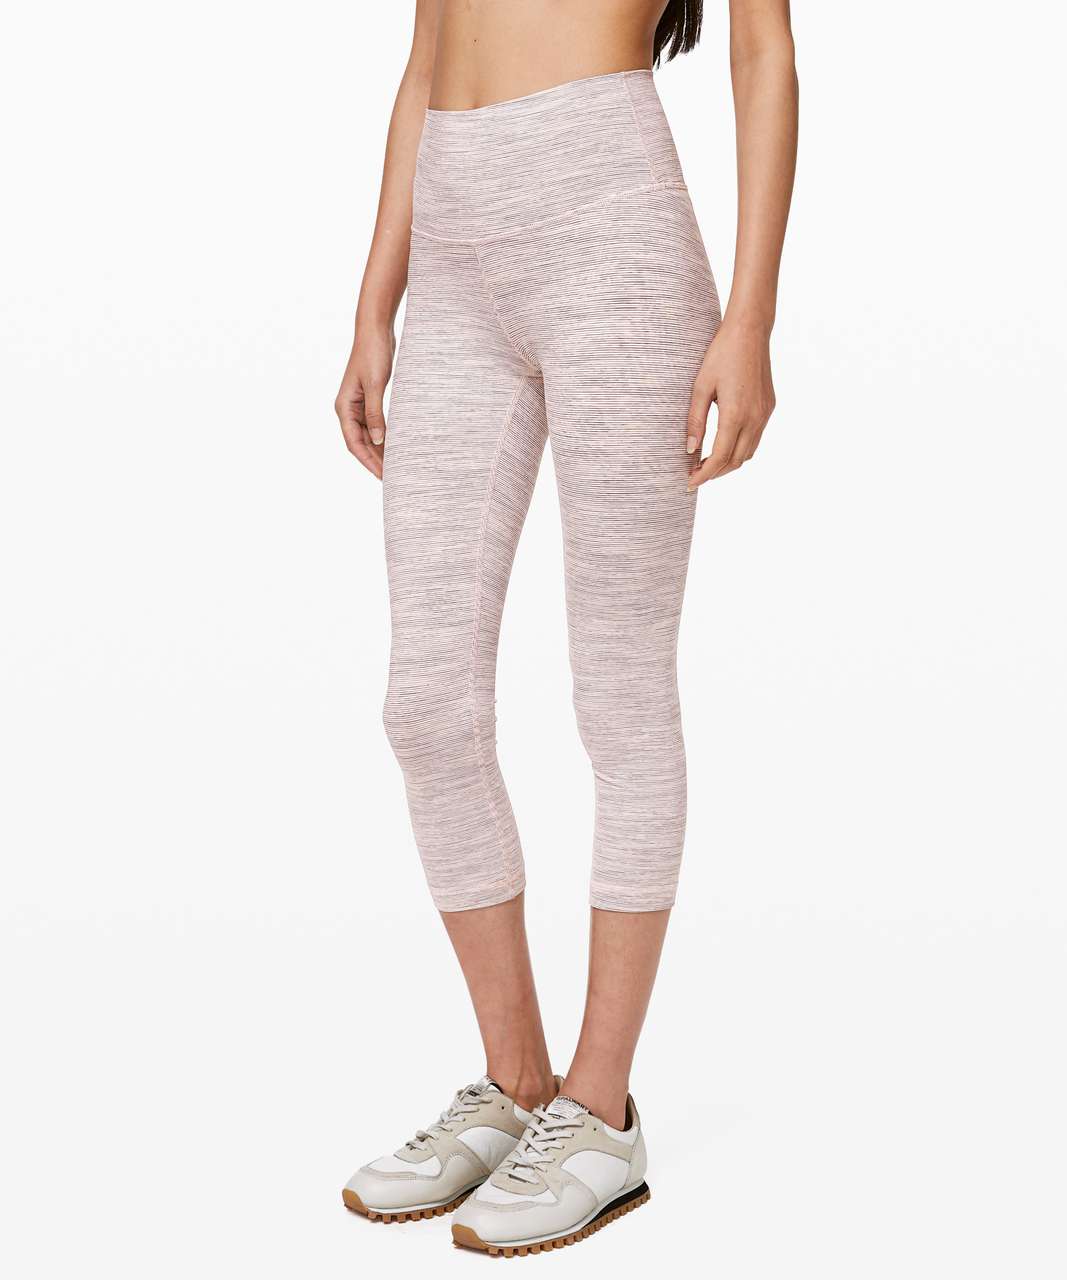 Lululemon Wunder Under Crop (High-Rise) *21" - Wee Are From Space Pink Bliss Vintage Mauve